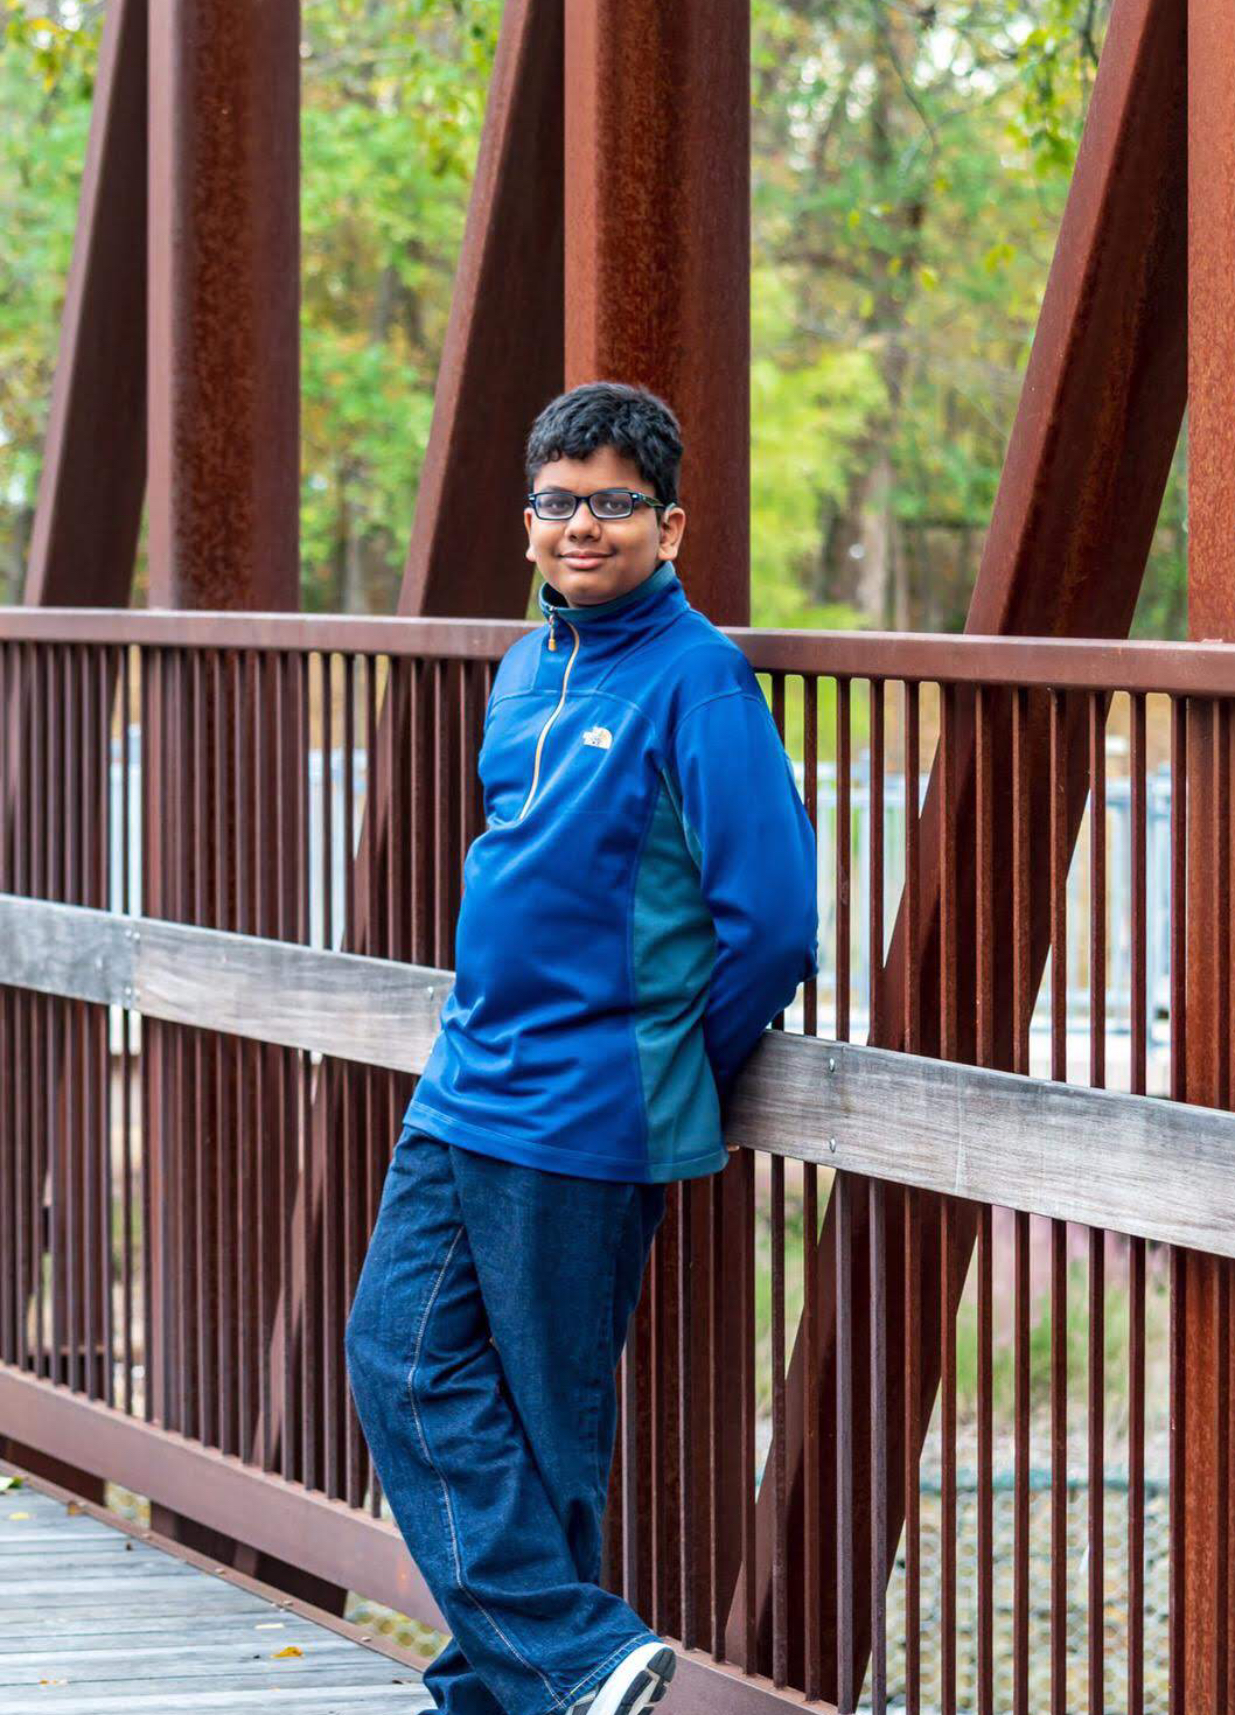 A 14-year-old boy with Usher Syndrome is leaning against the railing of a  bridge smiling at the camera. He looks relaxed and happy.